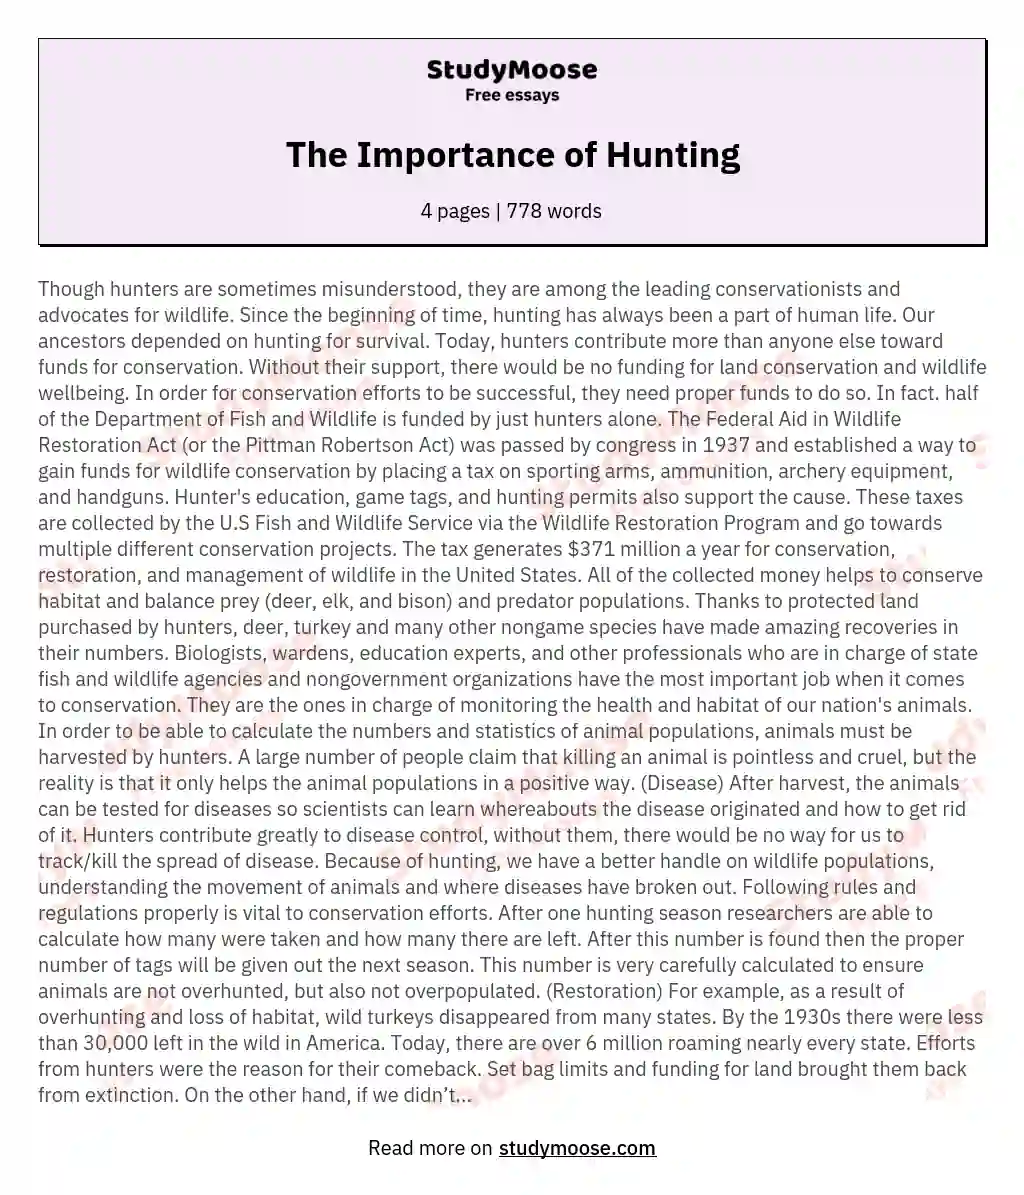 The Importance of Hunting